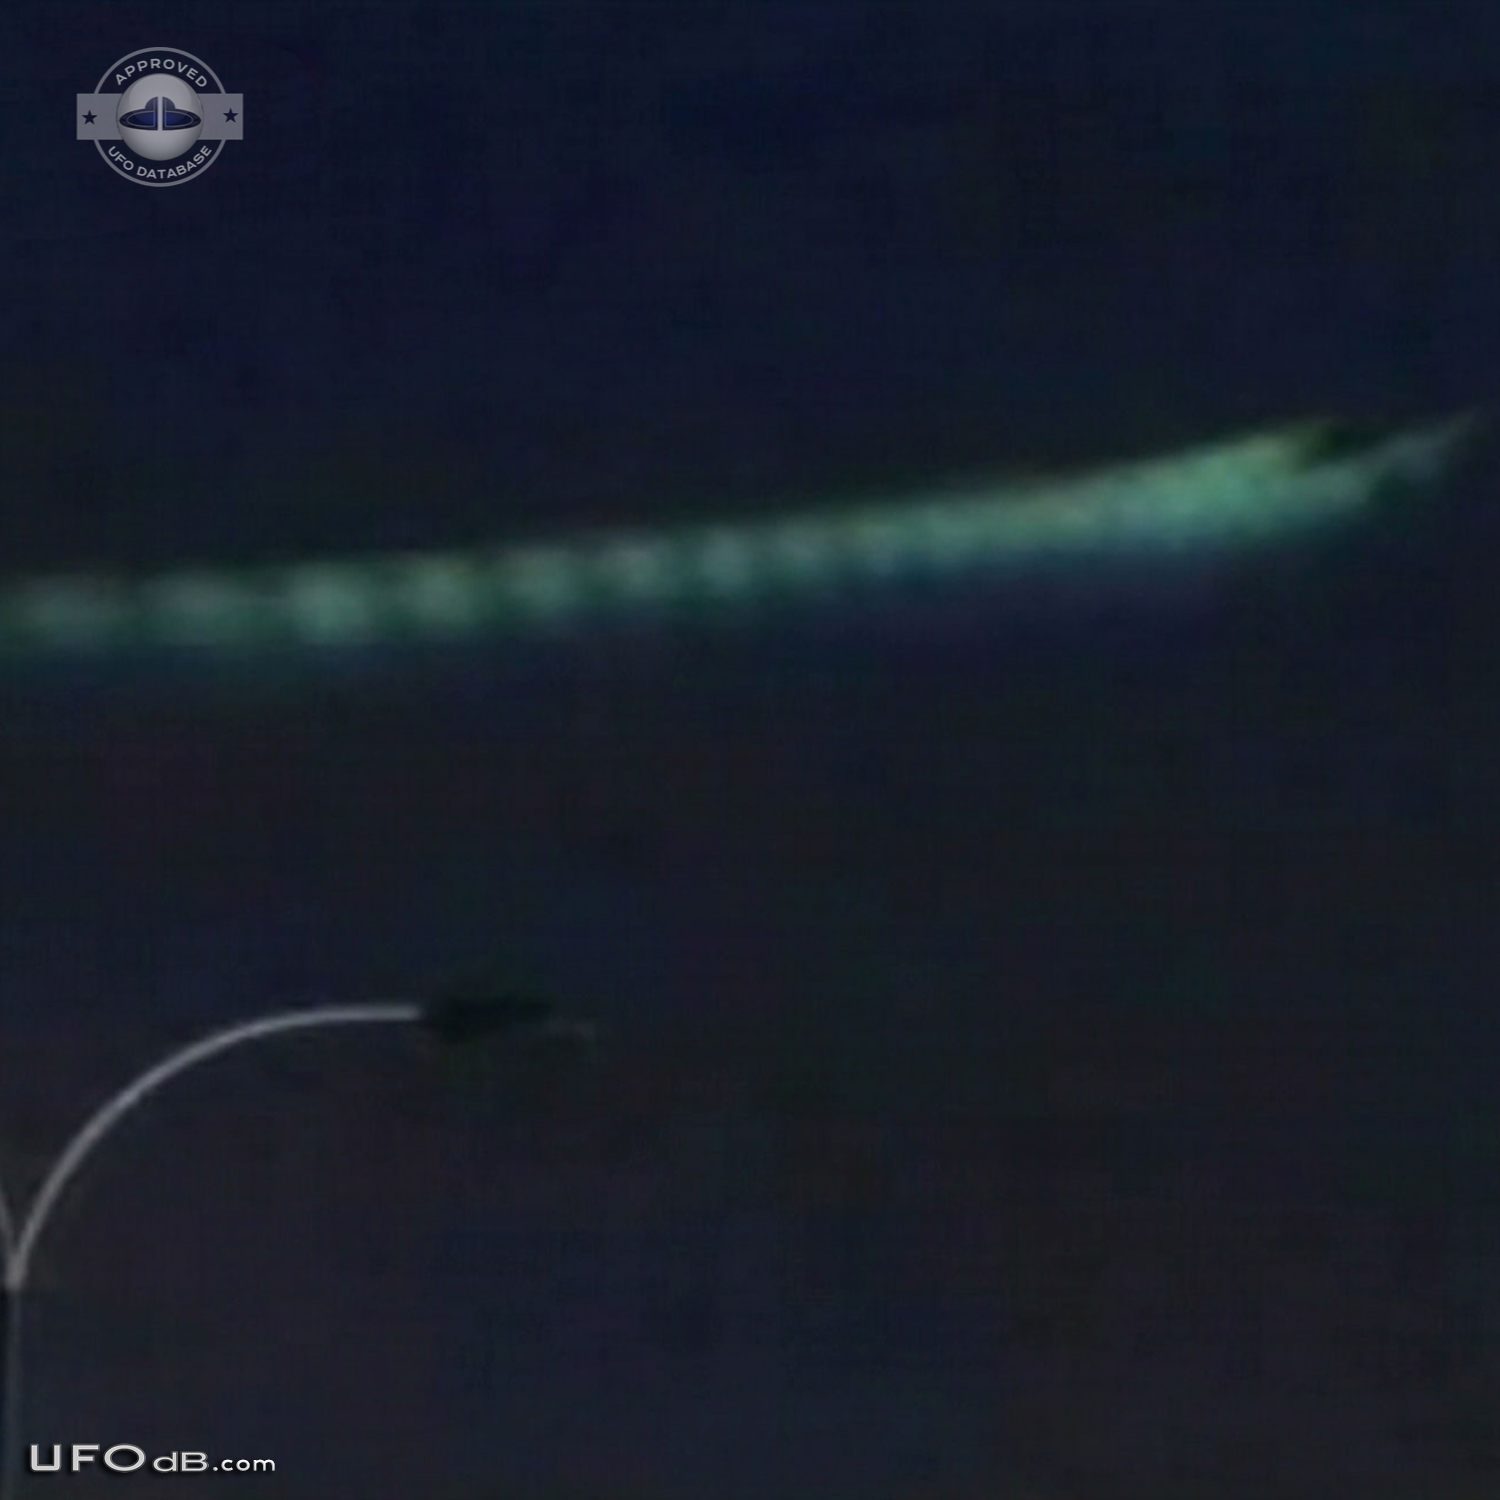 Flying Snake or Dragon UFO caught on picture in Iquique, Chile 2012  UFO Picture #421-3